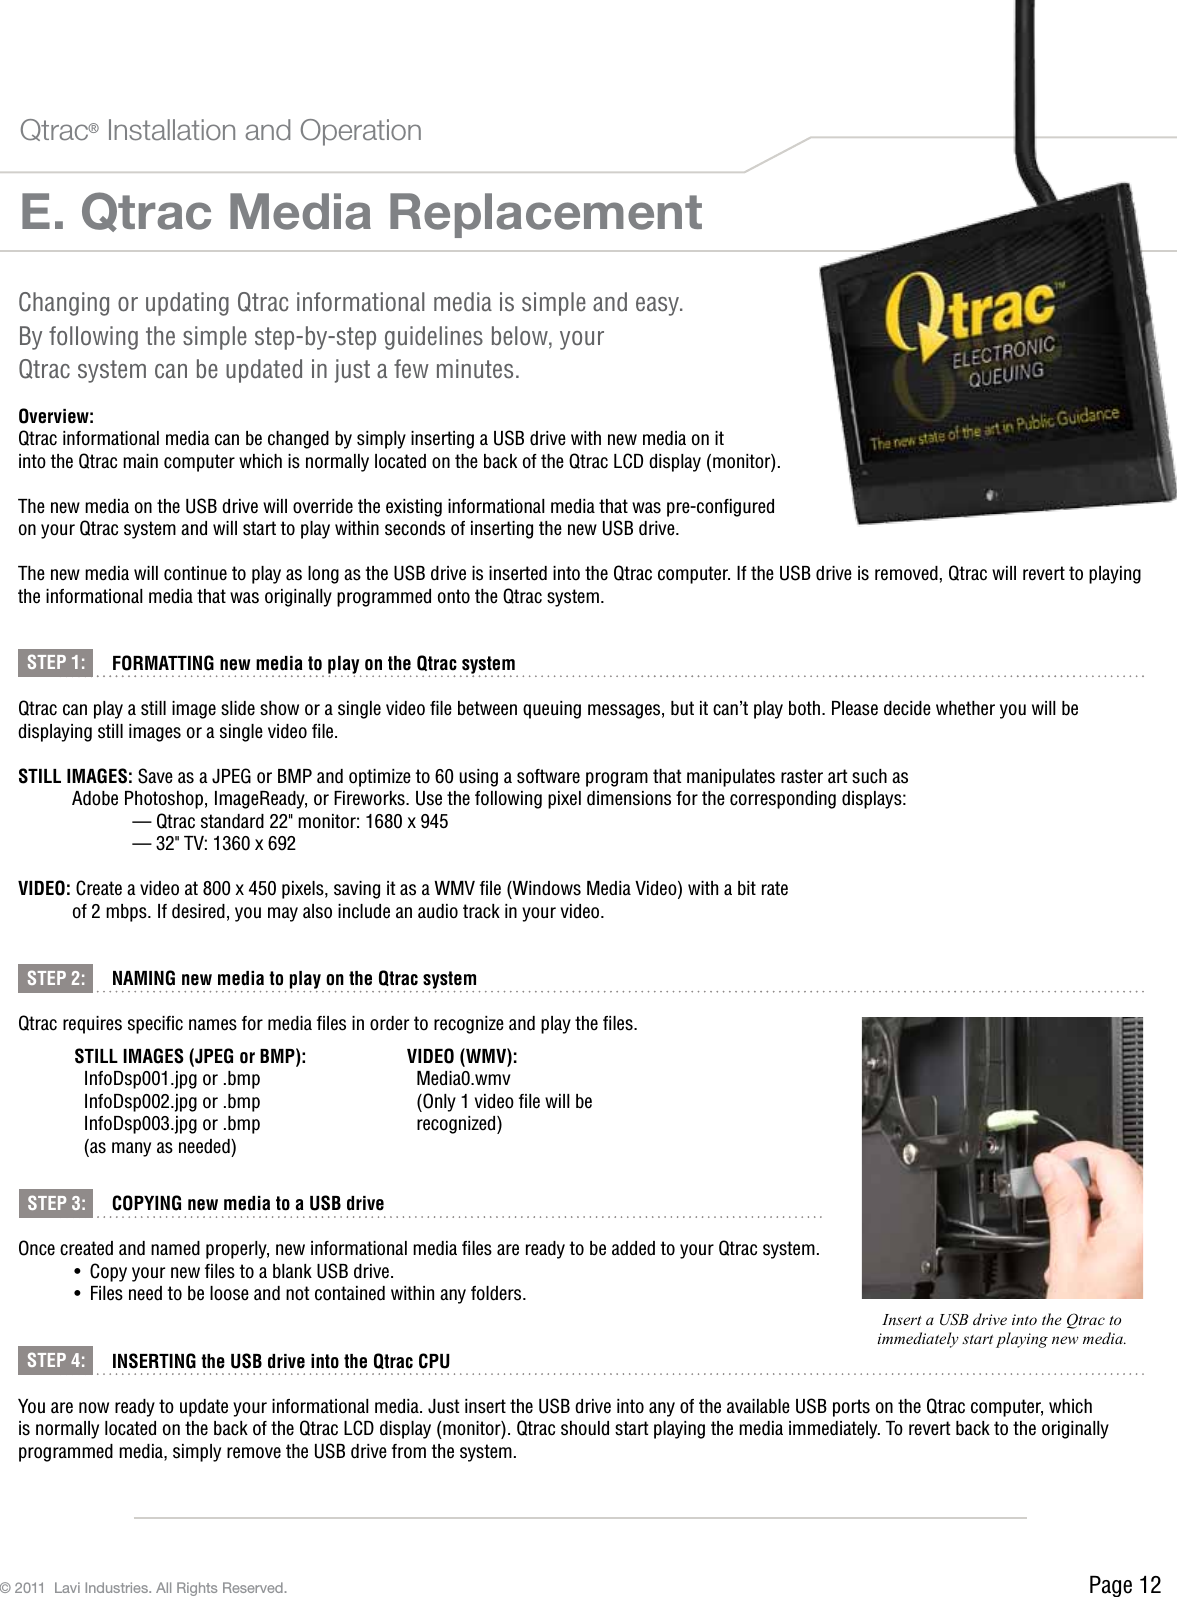 Page 12© 2011  Lavi Industries. All Rights Reserved.E. Qtrac Media ReplacementQtrac® Installation and OperationChanging or updating Qtrac informational media is simple and easy.  By following the simple step-by-step guidelines below, your  Qtrac system can be updated in just a few minutes.Overview:Qtrac informational media can be changed by simply inserting a USB drive with new media on it  into the Qtrac main computer which is normally located on the back of the Qtrac LCD display (monitor).The new media on the USB drive will override the existing informational media that was pre-conﬁgured  on your Qtrac system and will start to play within seconds of inserting the new USB drive. The new media will continue to play as long as the USB drive is inserted into the Qtrac computer. If the USB drive is removed, Qtrac will revert to playing the informational media that was originally programmed onto the Qtrac system. FORMATTING new media to play on the Qtrac systemQtrac can play a still image slide show or a single video ﬁle between queuing messages, but it can’t play both. Please decide whether you will be displaying still images or a single video ﬁle.STILL IMAGES: Save as a JPEG or BMP and optimize to 60 using a software program that manipulates raster art such as   Adobe Photoshop, ImageReady, or Fireworks. Use the following pixel dimensions for the corresponding displays:     — Qtrac standard 22&quot; monitor: 1680 x 945     — 32&quot; TV: 1360 x 692 VIDEO: Create a video at 800 x 450 pixels, saving it as a WMV ﬁle (Windows Media Video) with a bit rate   of 2 mbps. If desired, you may also include an audio track in your video. NAMING new media to play on the Qtrac systemQtrac requires speciﬁc names for media ﬁles in order to recognize and play the ﬁles.    COPYING new media to a USB driveOnce created and named properly, new informational media ﬁles are ready to be added to your Qtrac system.•  Copy your new les to a blank USB drive.•  Files need to be loose and not contained within any folders. INSERTING the USB drive into the Qtrac CPUYou are now ready to update your informational media. Just insert the USB drive into any of the available USB ports on the Qtrac computer, which is normally located on the back of the Qtrac LCD display (monitor). Qtrac should start playing the media immediately. To revert back to the originally programmed media, simply remove the USB drive from the system.STILL IMAGES (JPEG or BMP):InfoDsp001.jpg or .bmpInfoDsp002.jpg or .bmpInfoDsp003.jpg or .bmp(as many as needed)VIDEO (WMV):Media0.wmv(Only 1 video ﬁle will be recognized)STEP 1:STEP 2:STEP 3:STEP 4:Insert a USB drive into the Qtrac to immediately start playing new media.